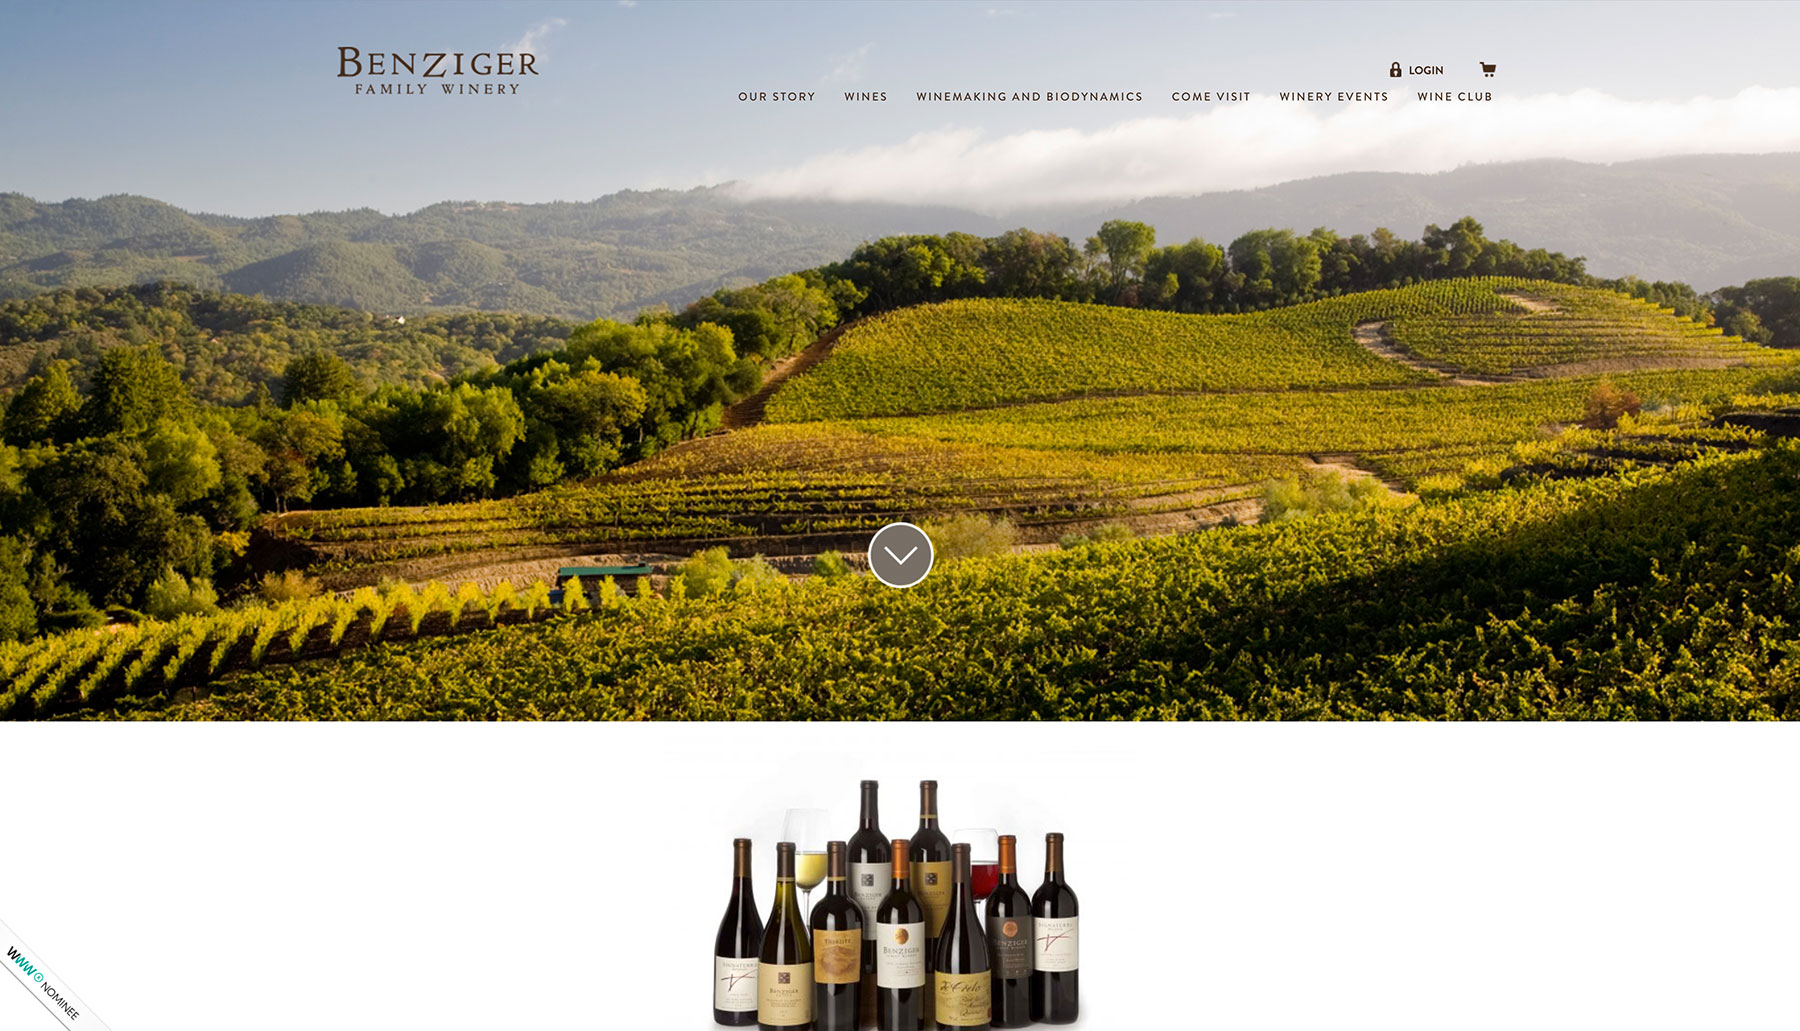 Strong photography on Benziger Family Winery's home page